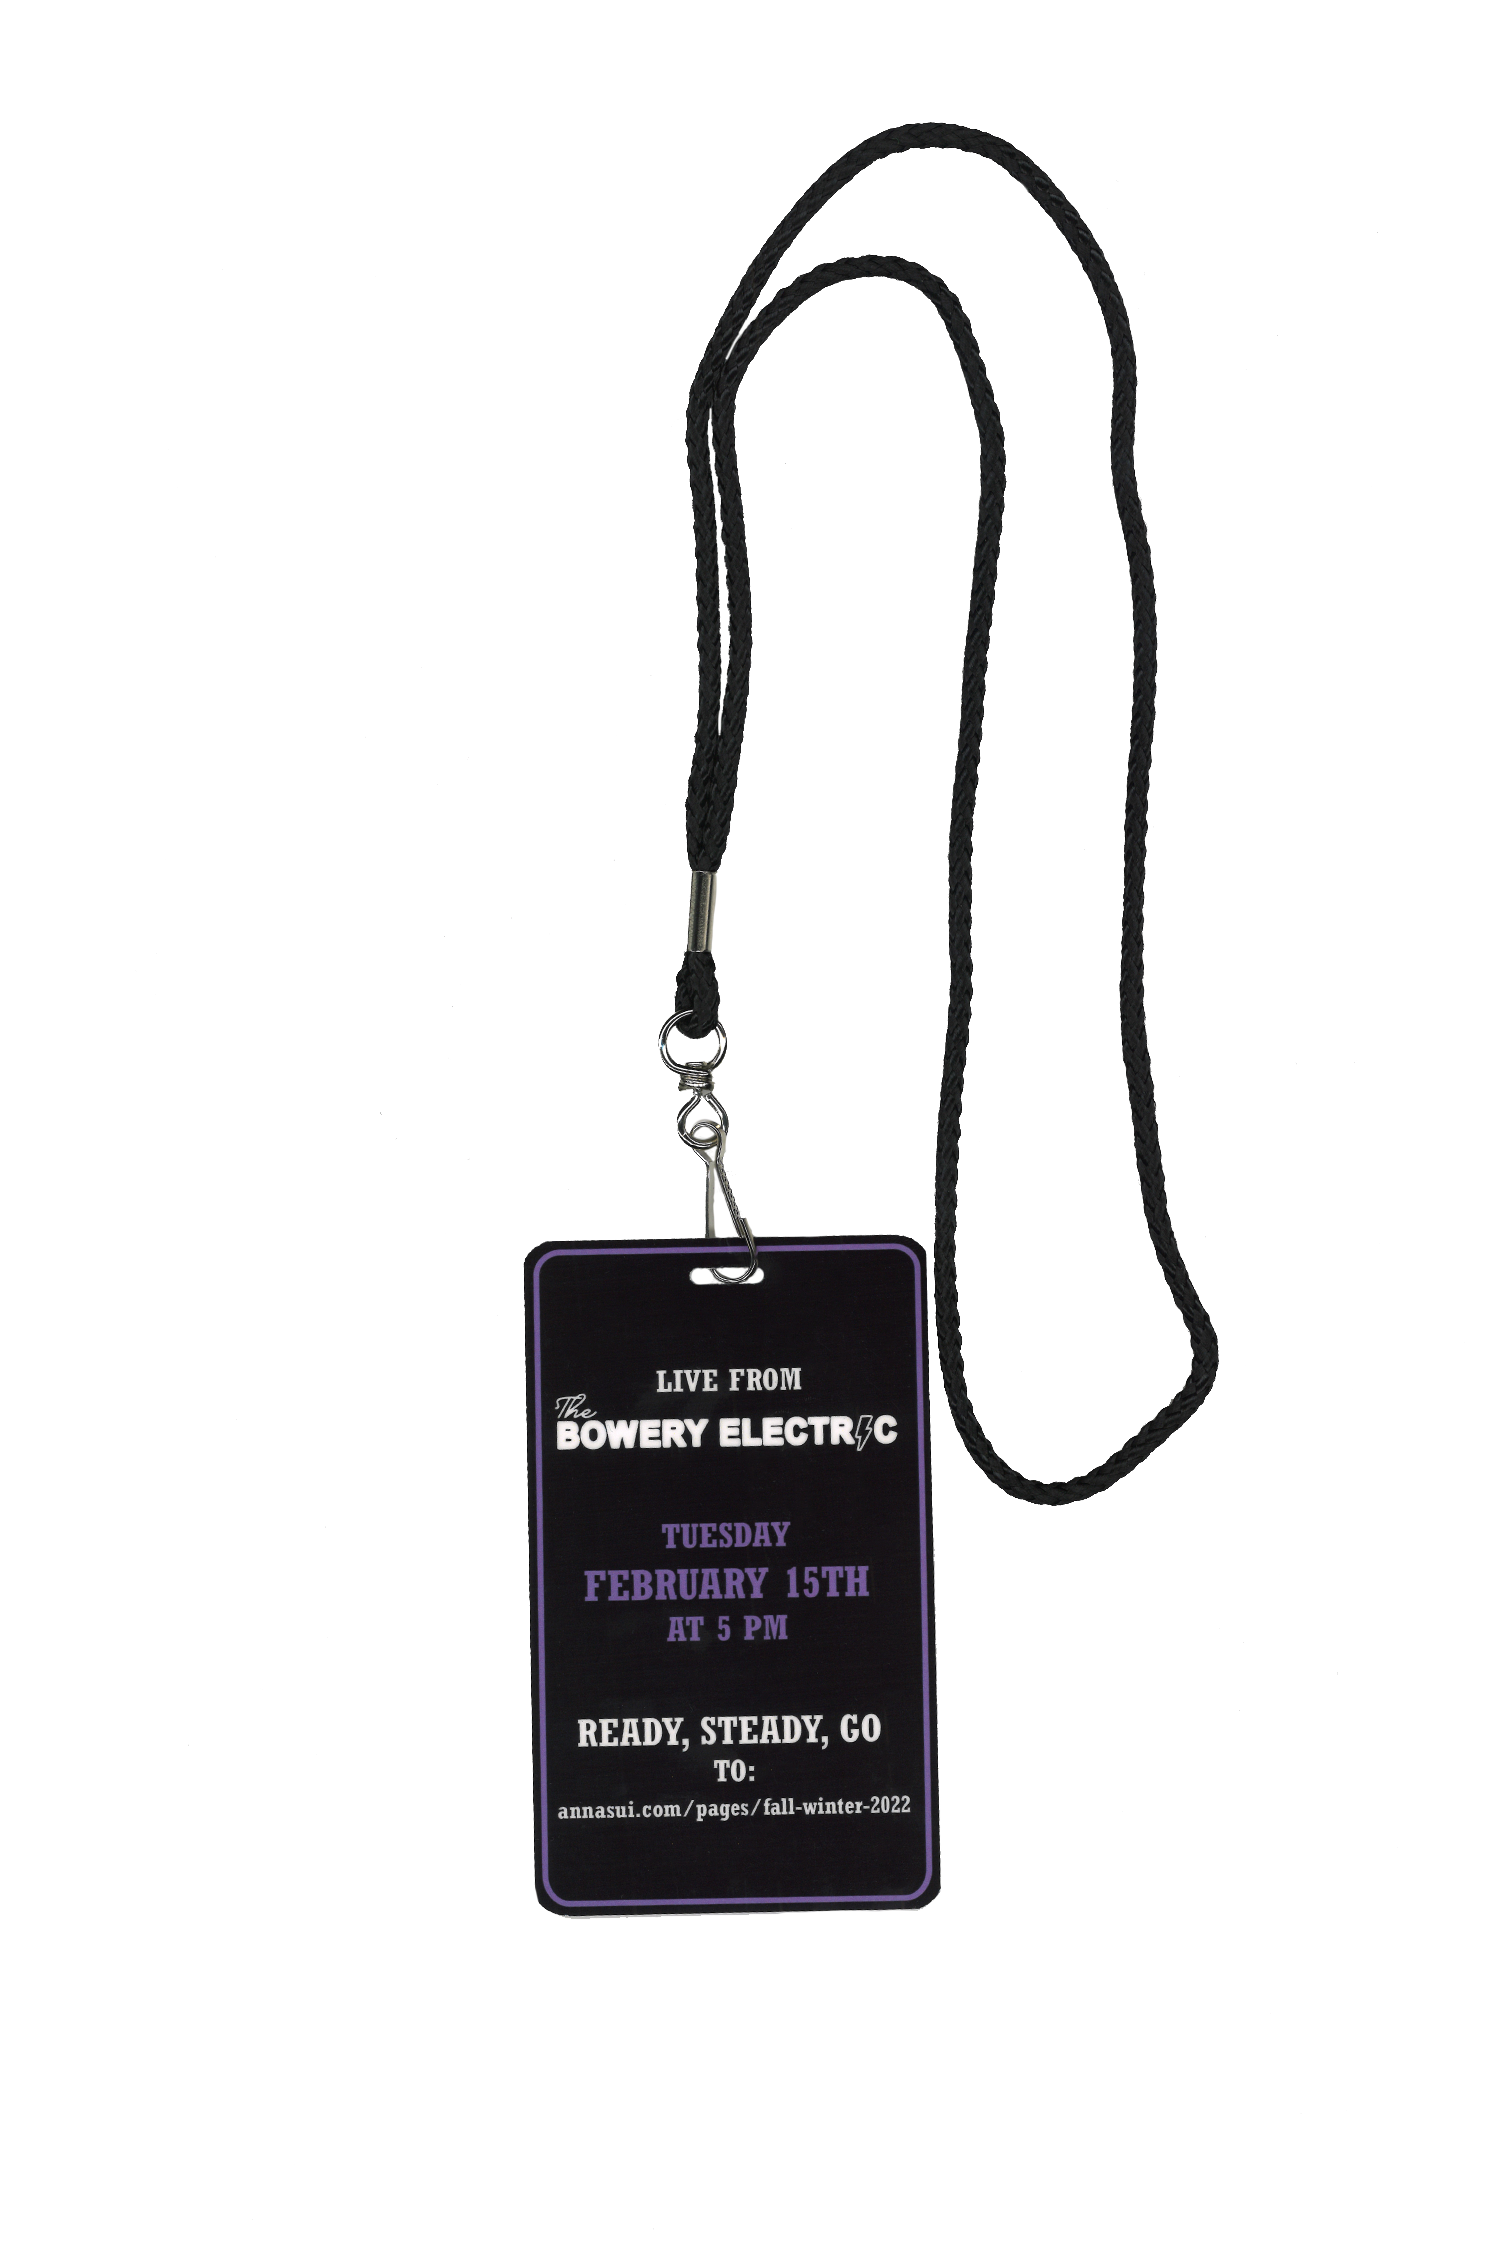 Anna Sui FW22 Limited Edition Backstage Pass - Anna Sui